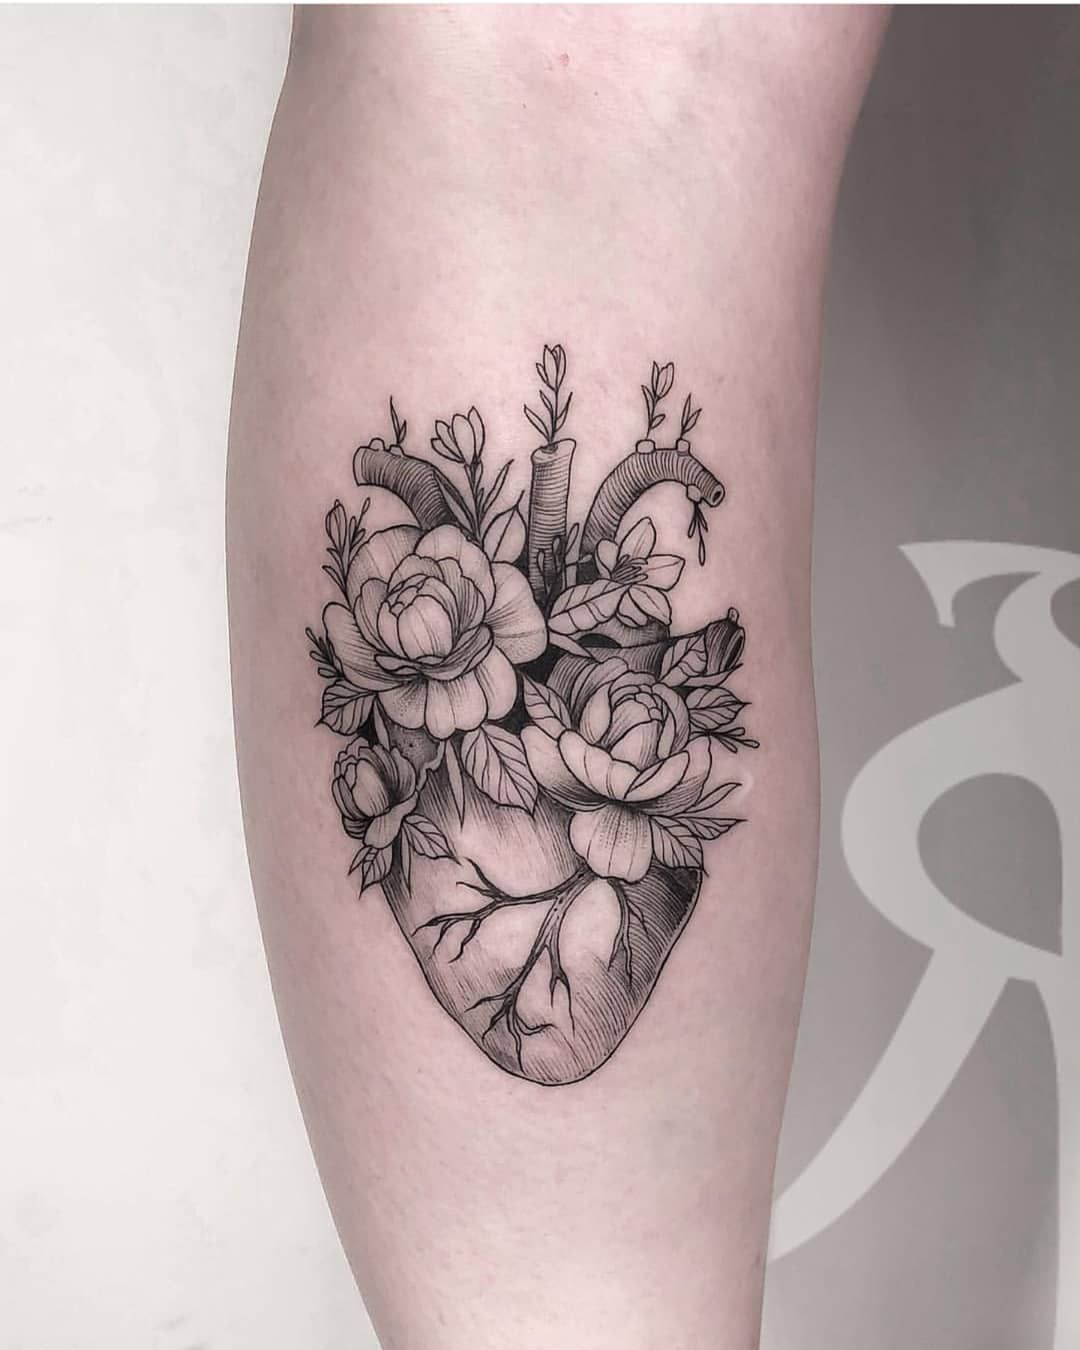 Anatomical Heart Tattoo Designs For Guys With Meaning (43)